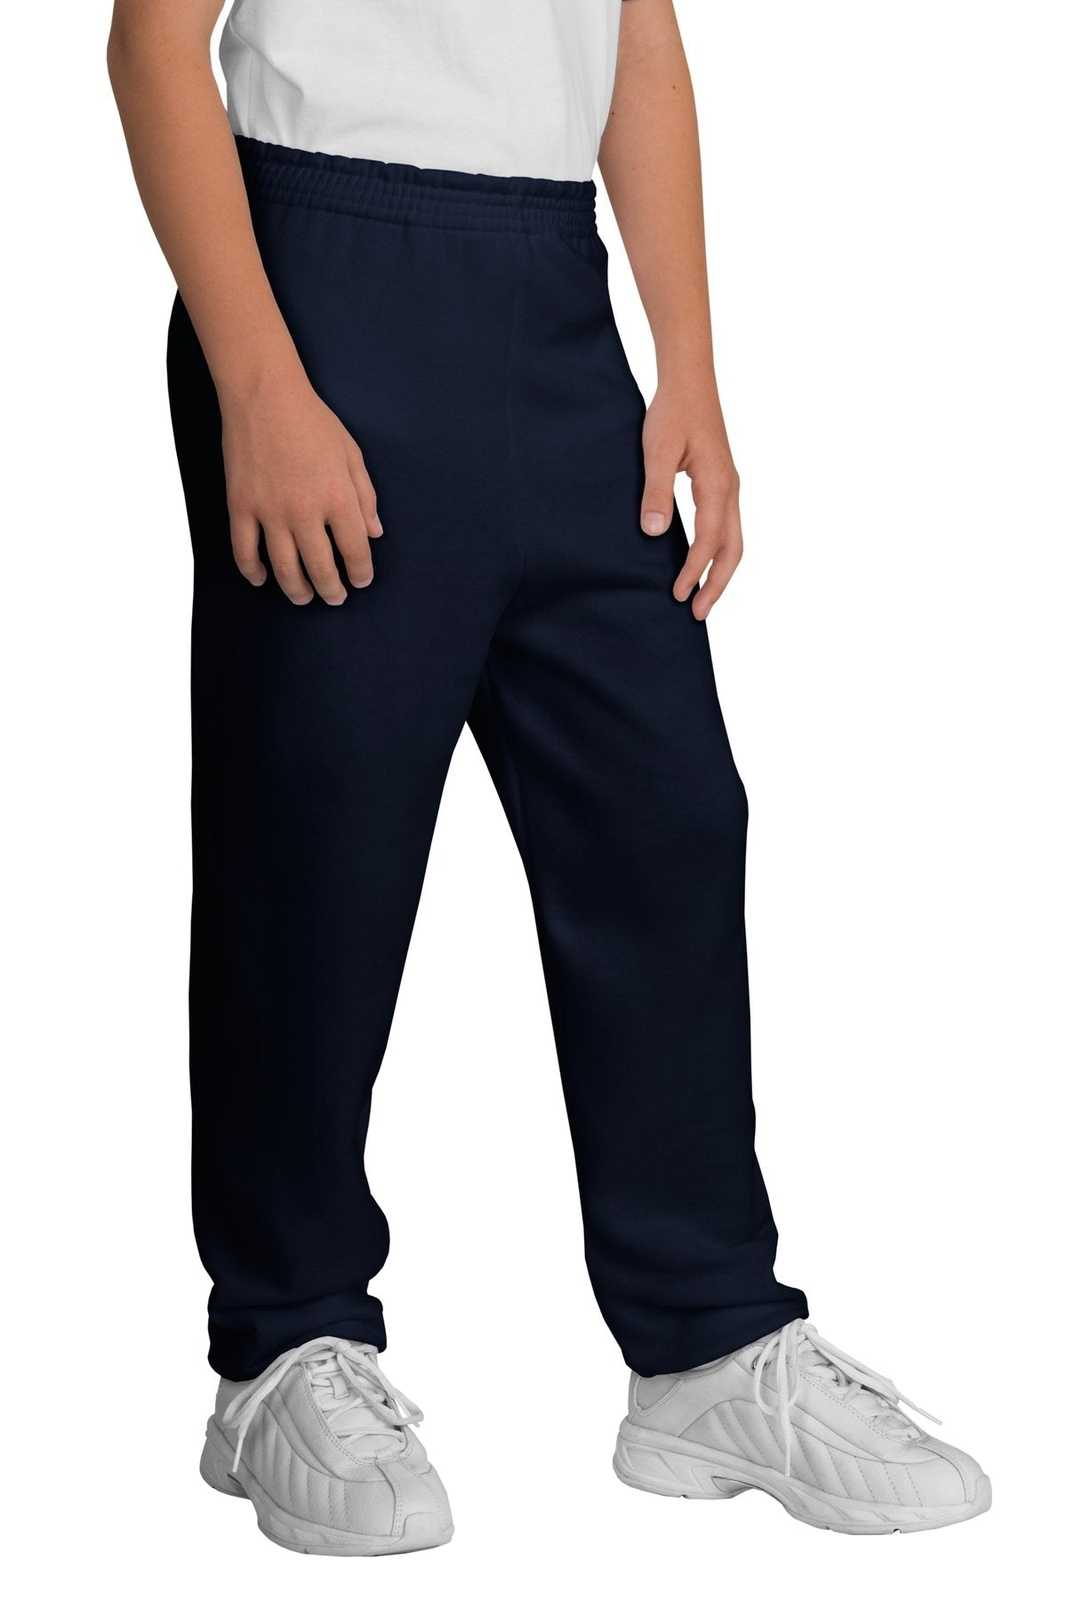 Port & Company PC90YP Youth Core Fleece Sweatpant - Navy - HIT a Double - 1